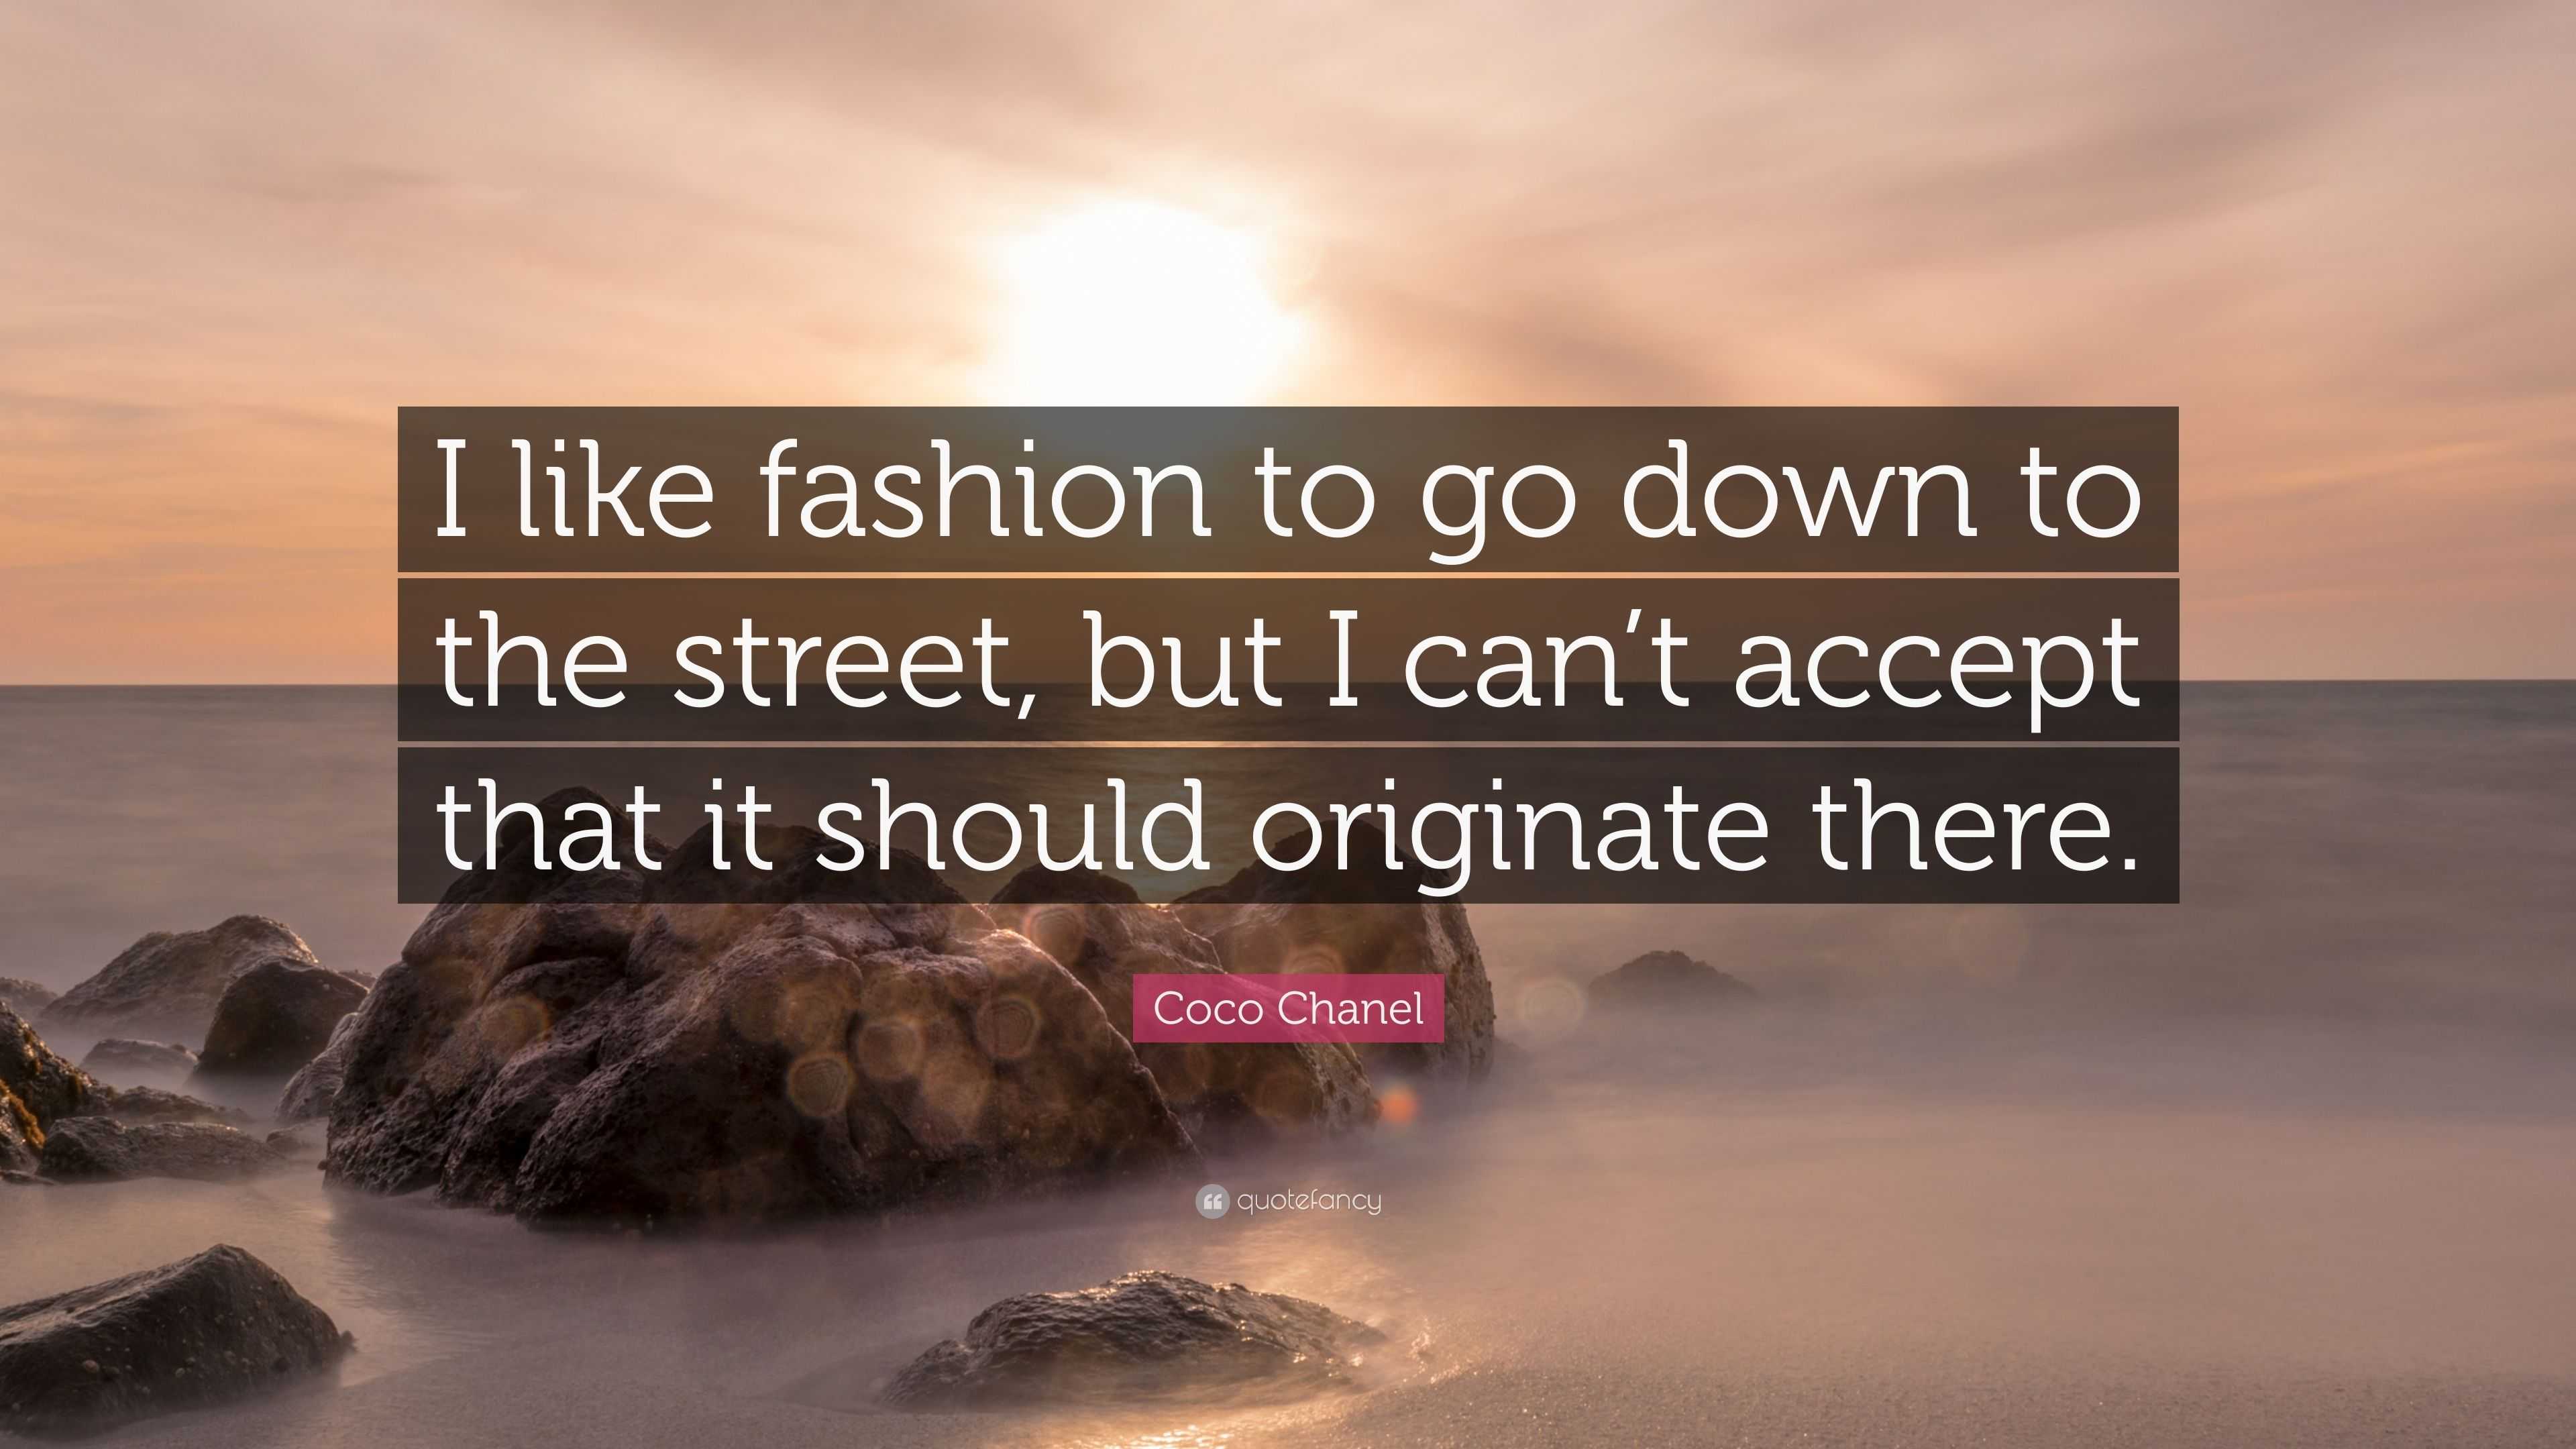 Coco Chanel “I like fashion to go down to the street, but I can't